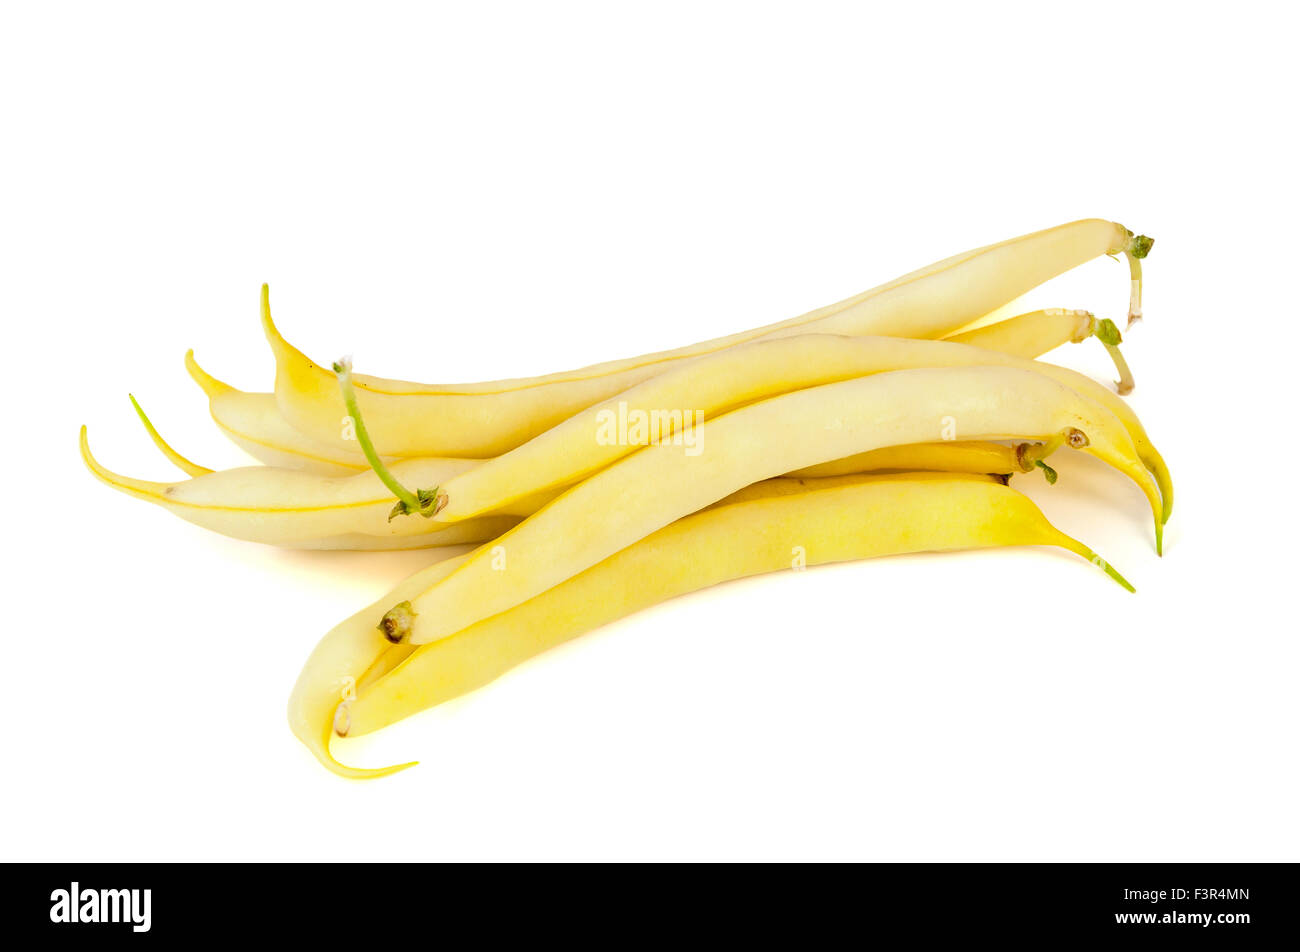 Yellow beans isolated on white background with clipping path Stock Photo